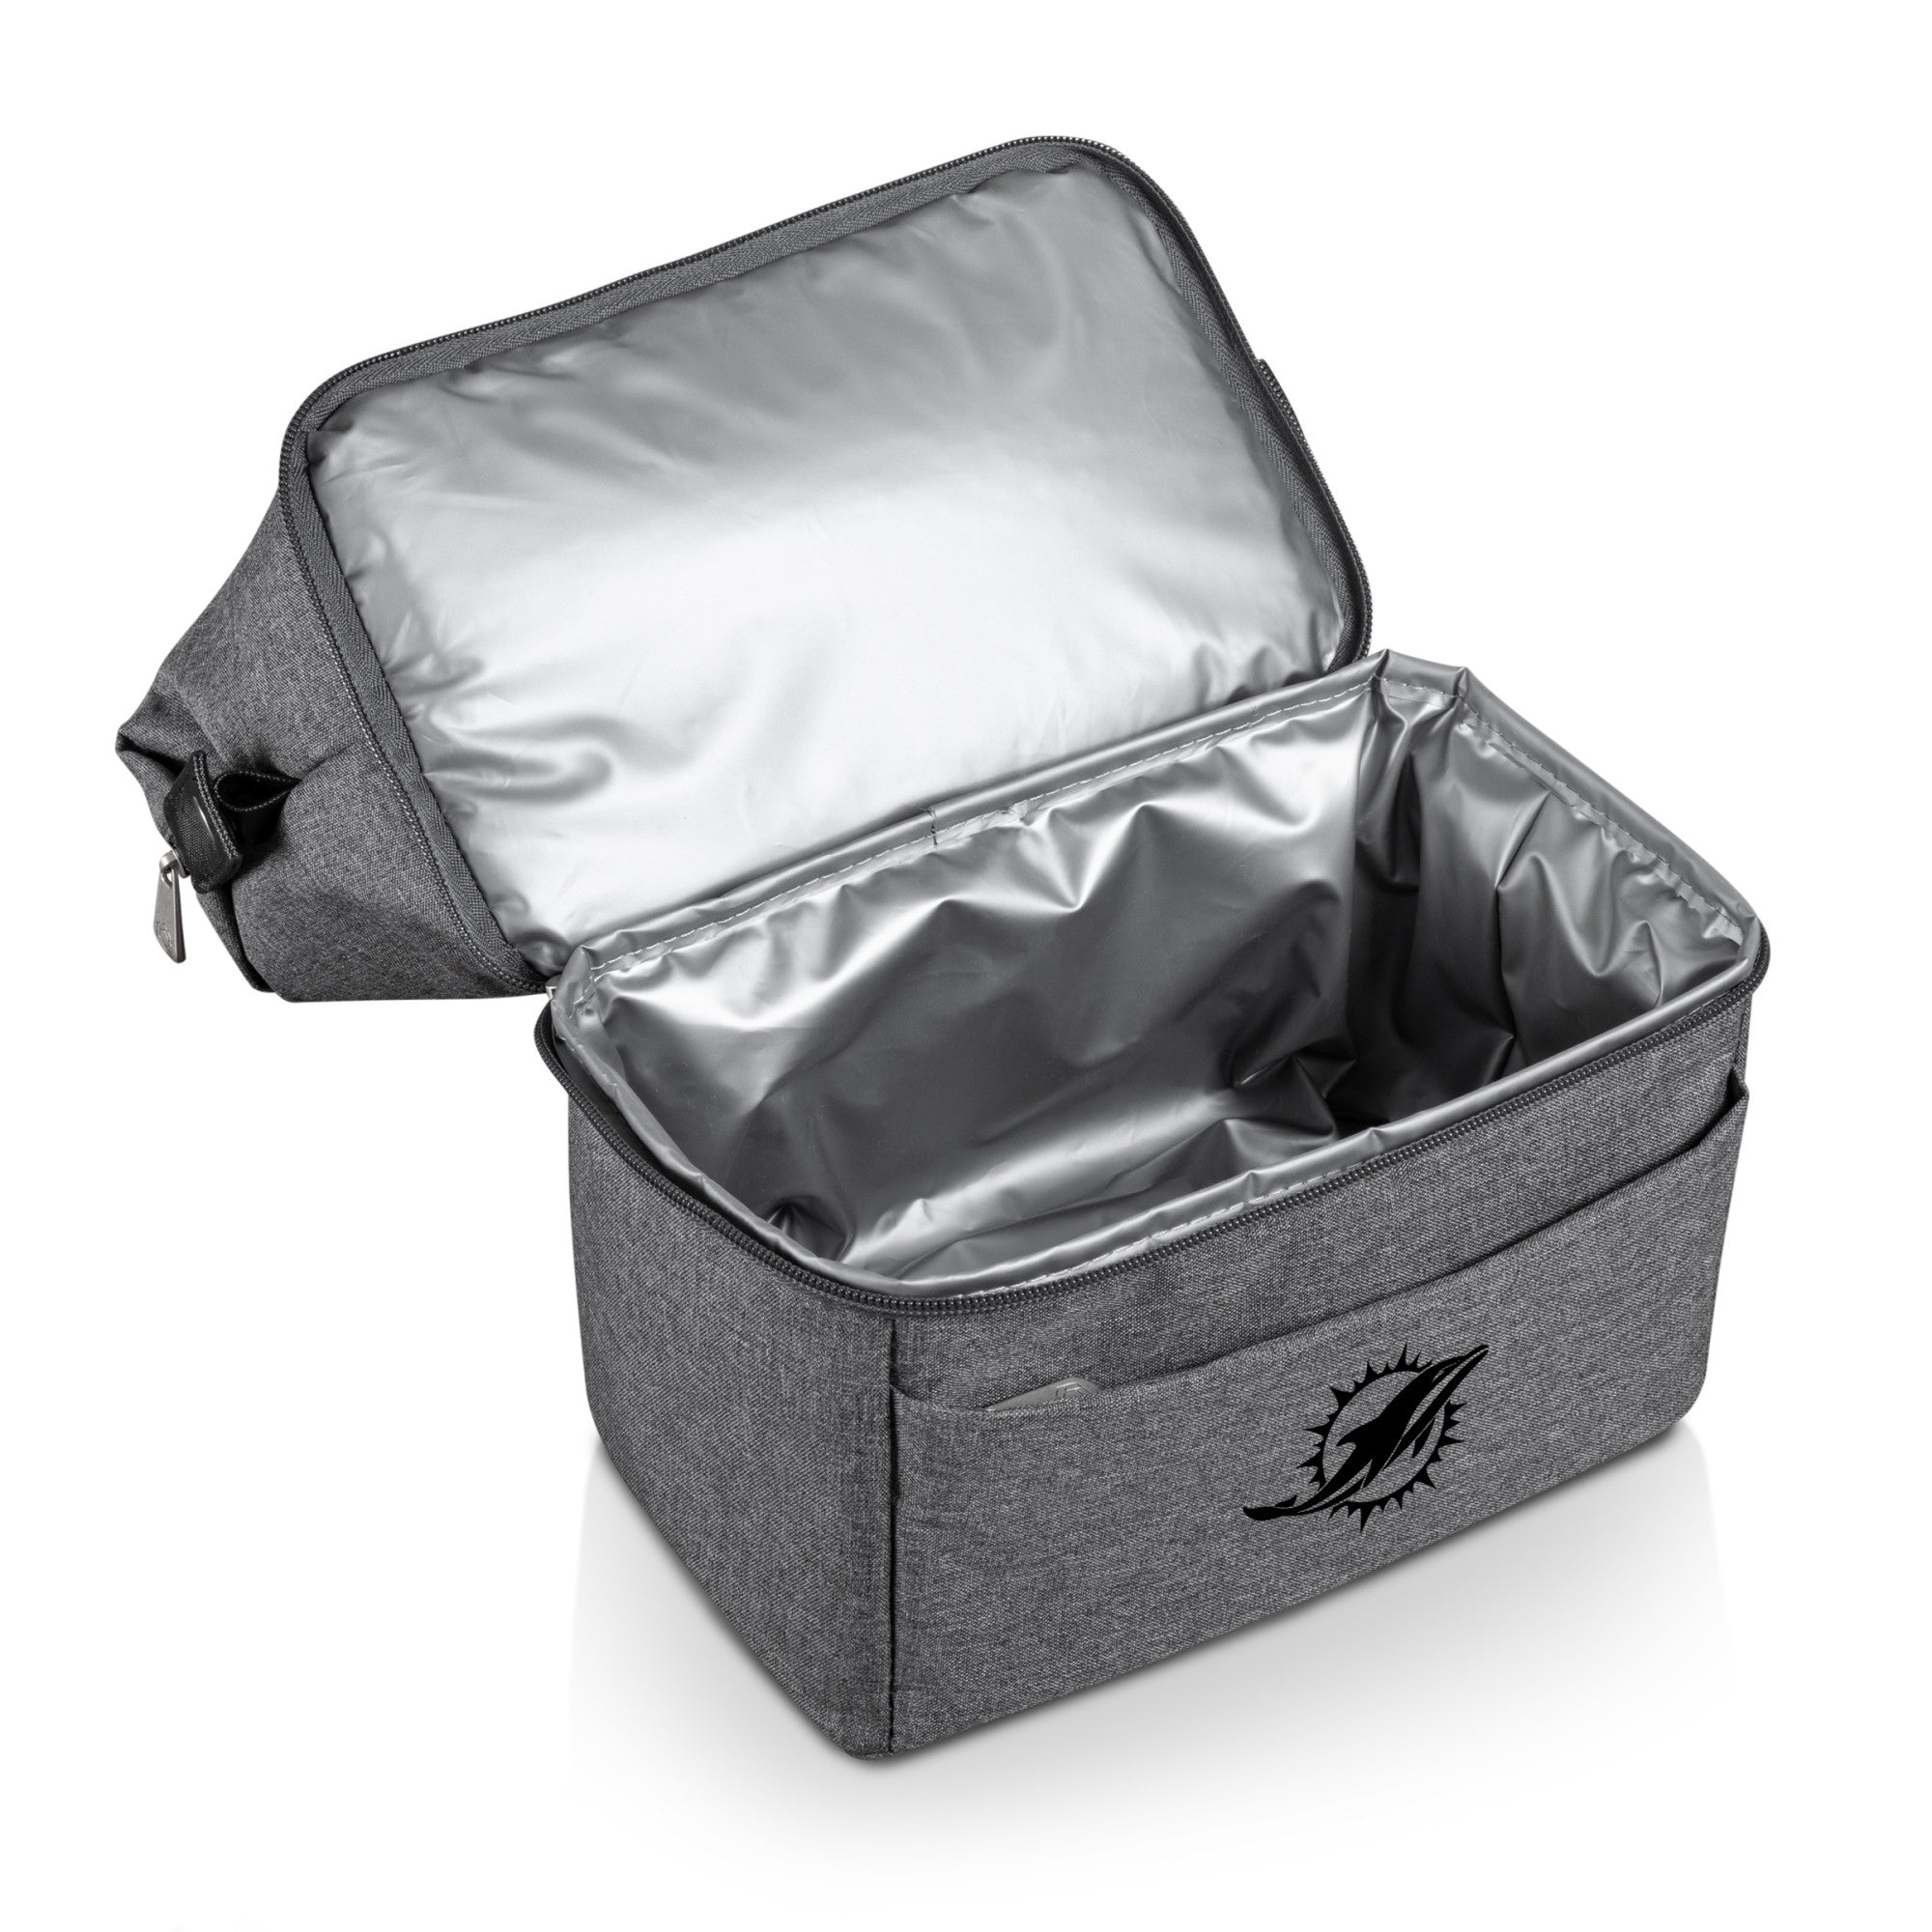 Miami Dolphins - Urban Lunch Bag Cooler